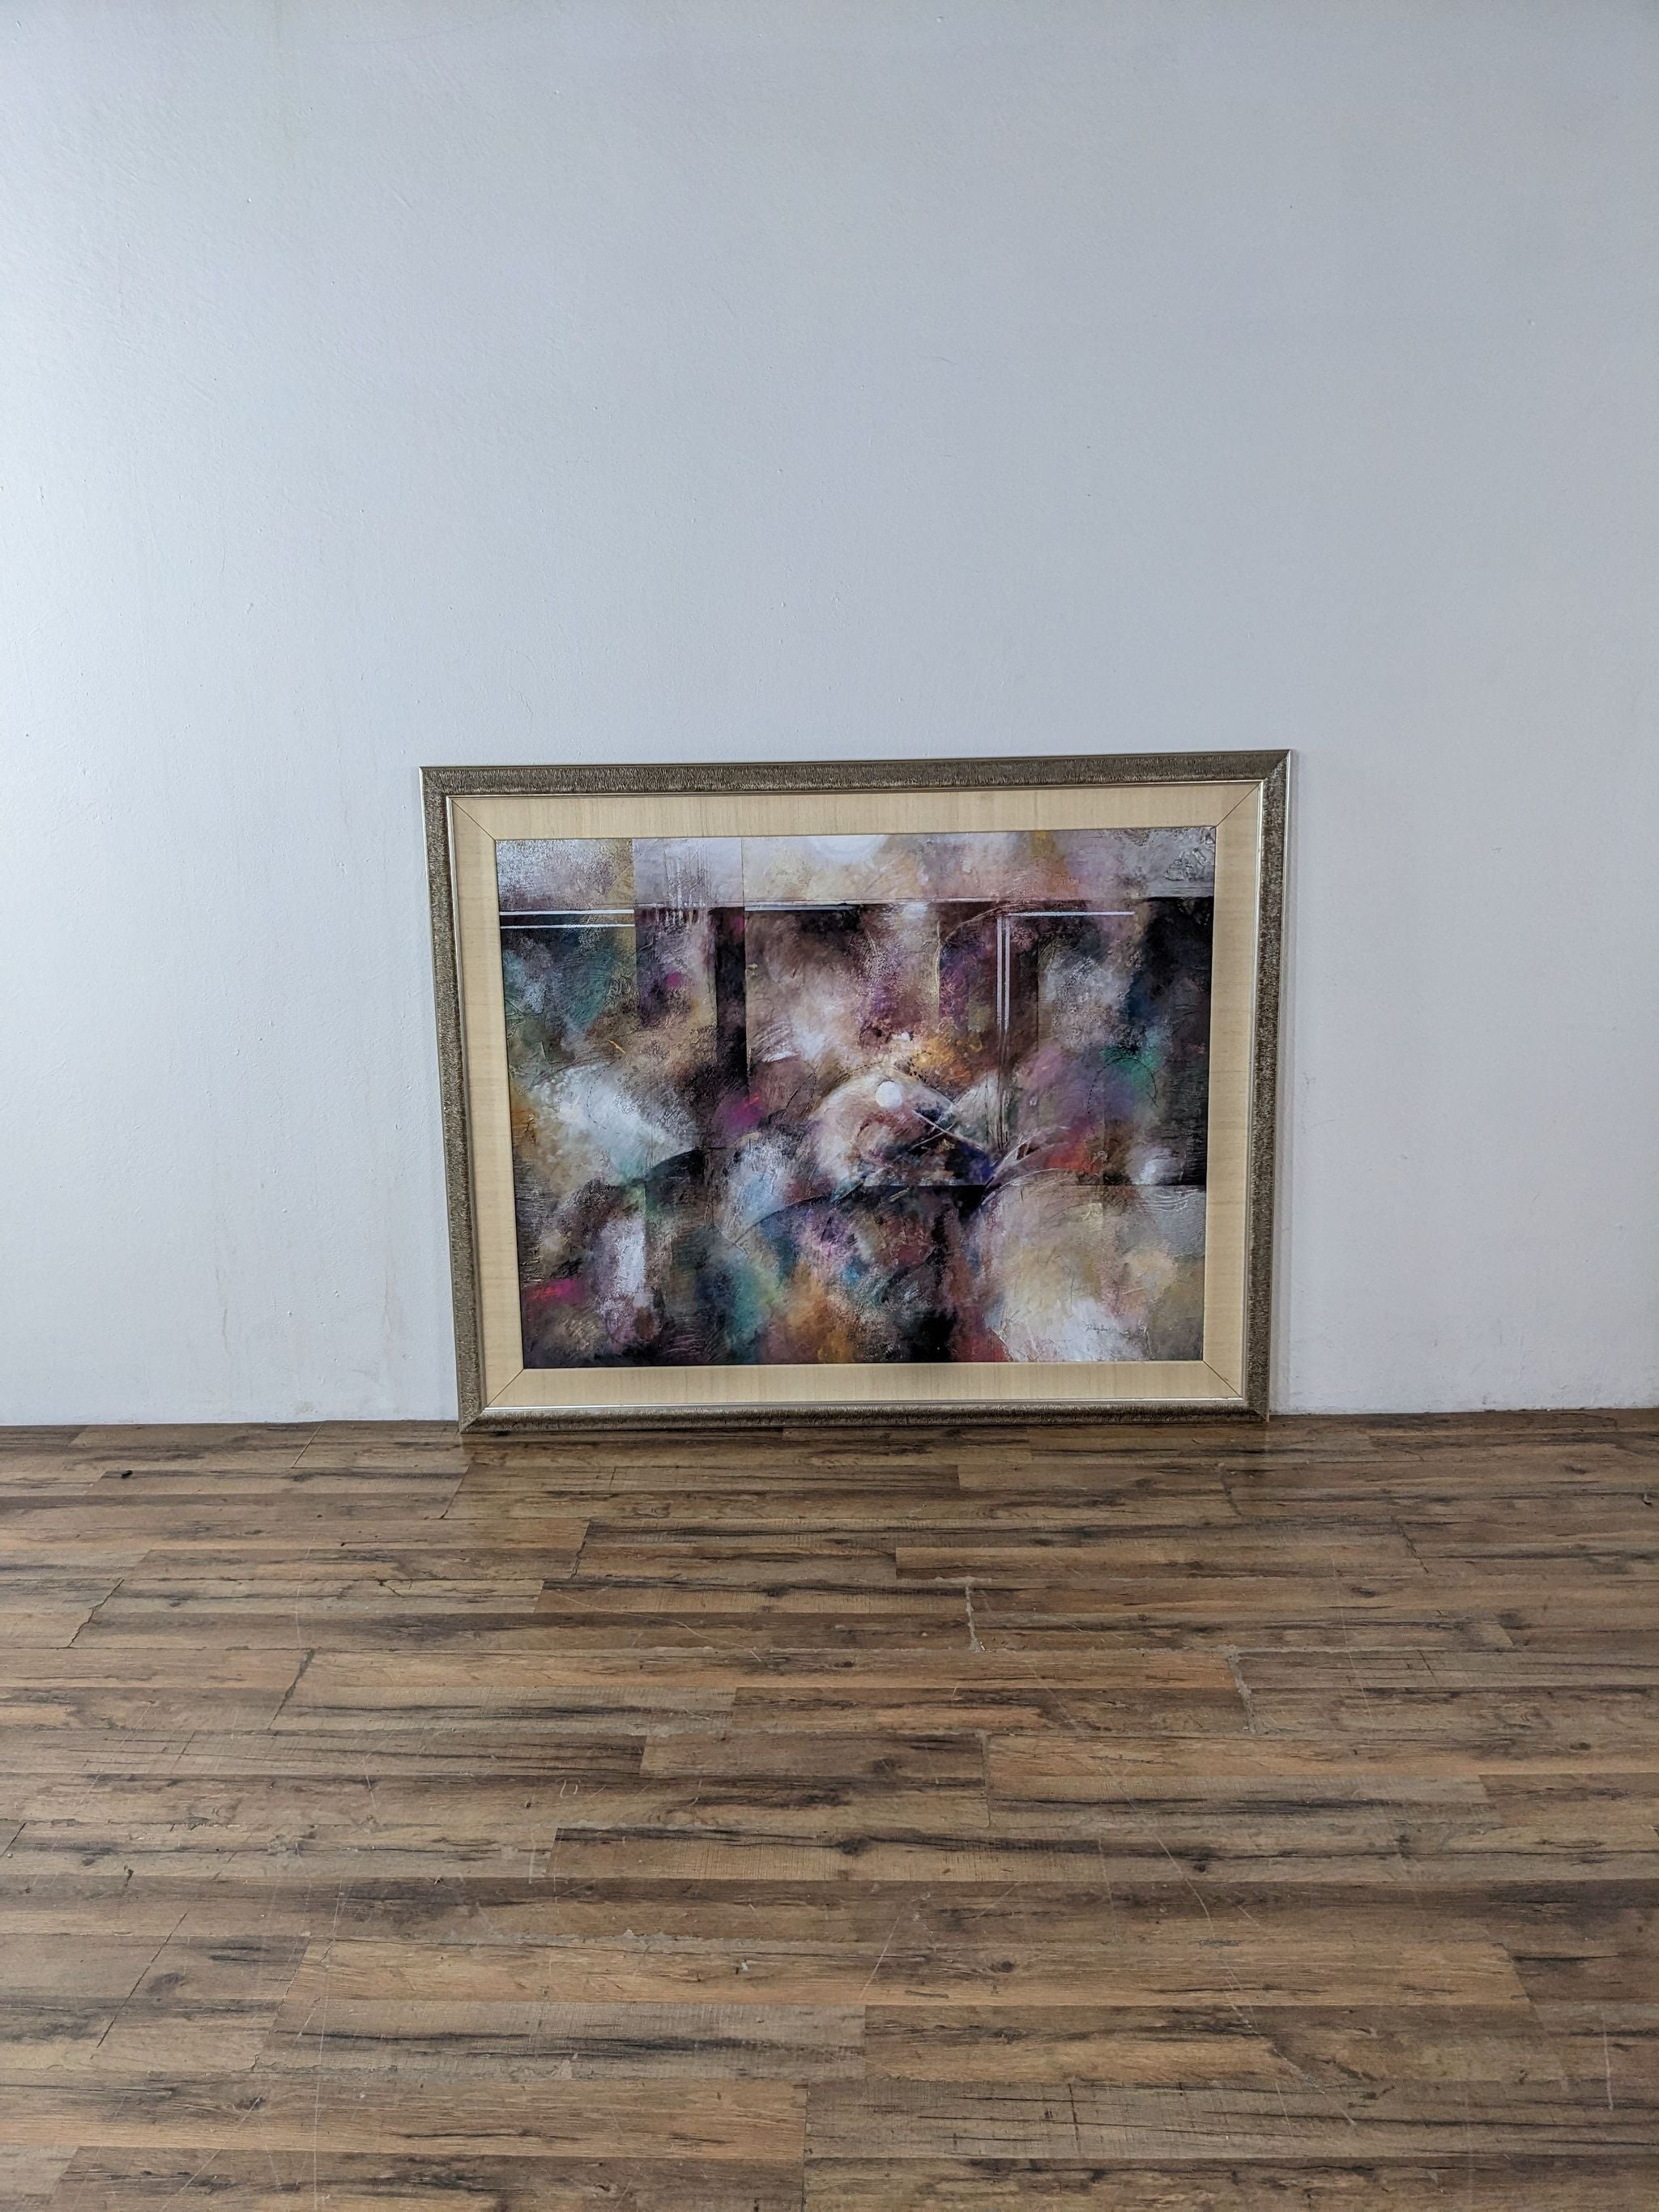 Colorful abstract painting by Douglas in a golden frame, displayed on a wooden floor against a white wall, Reperch brand.